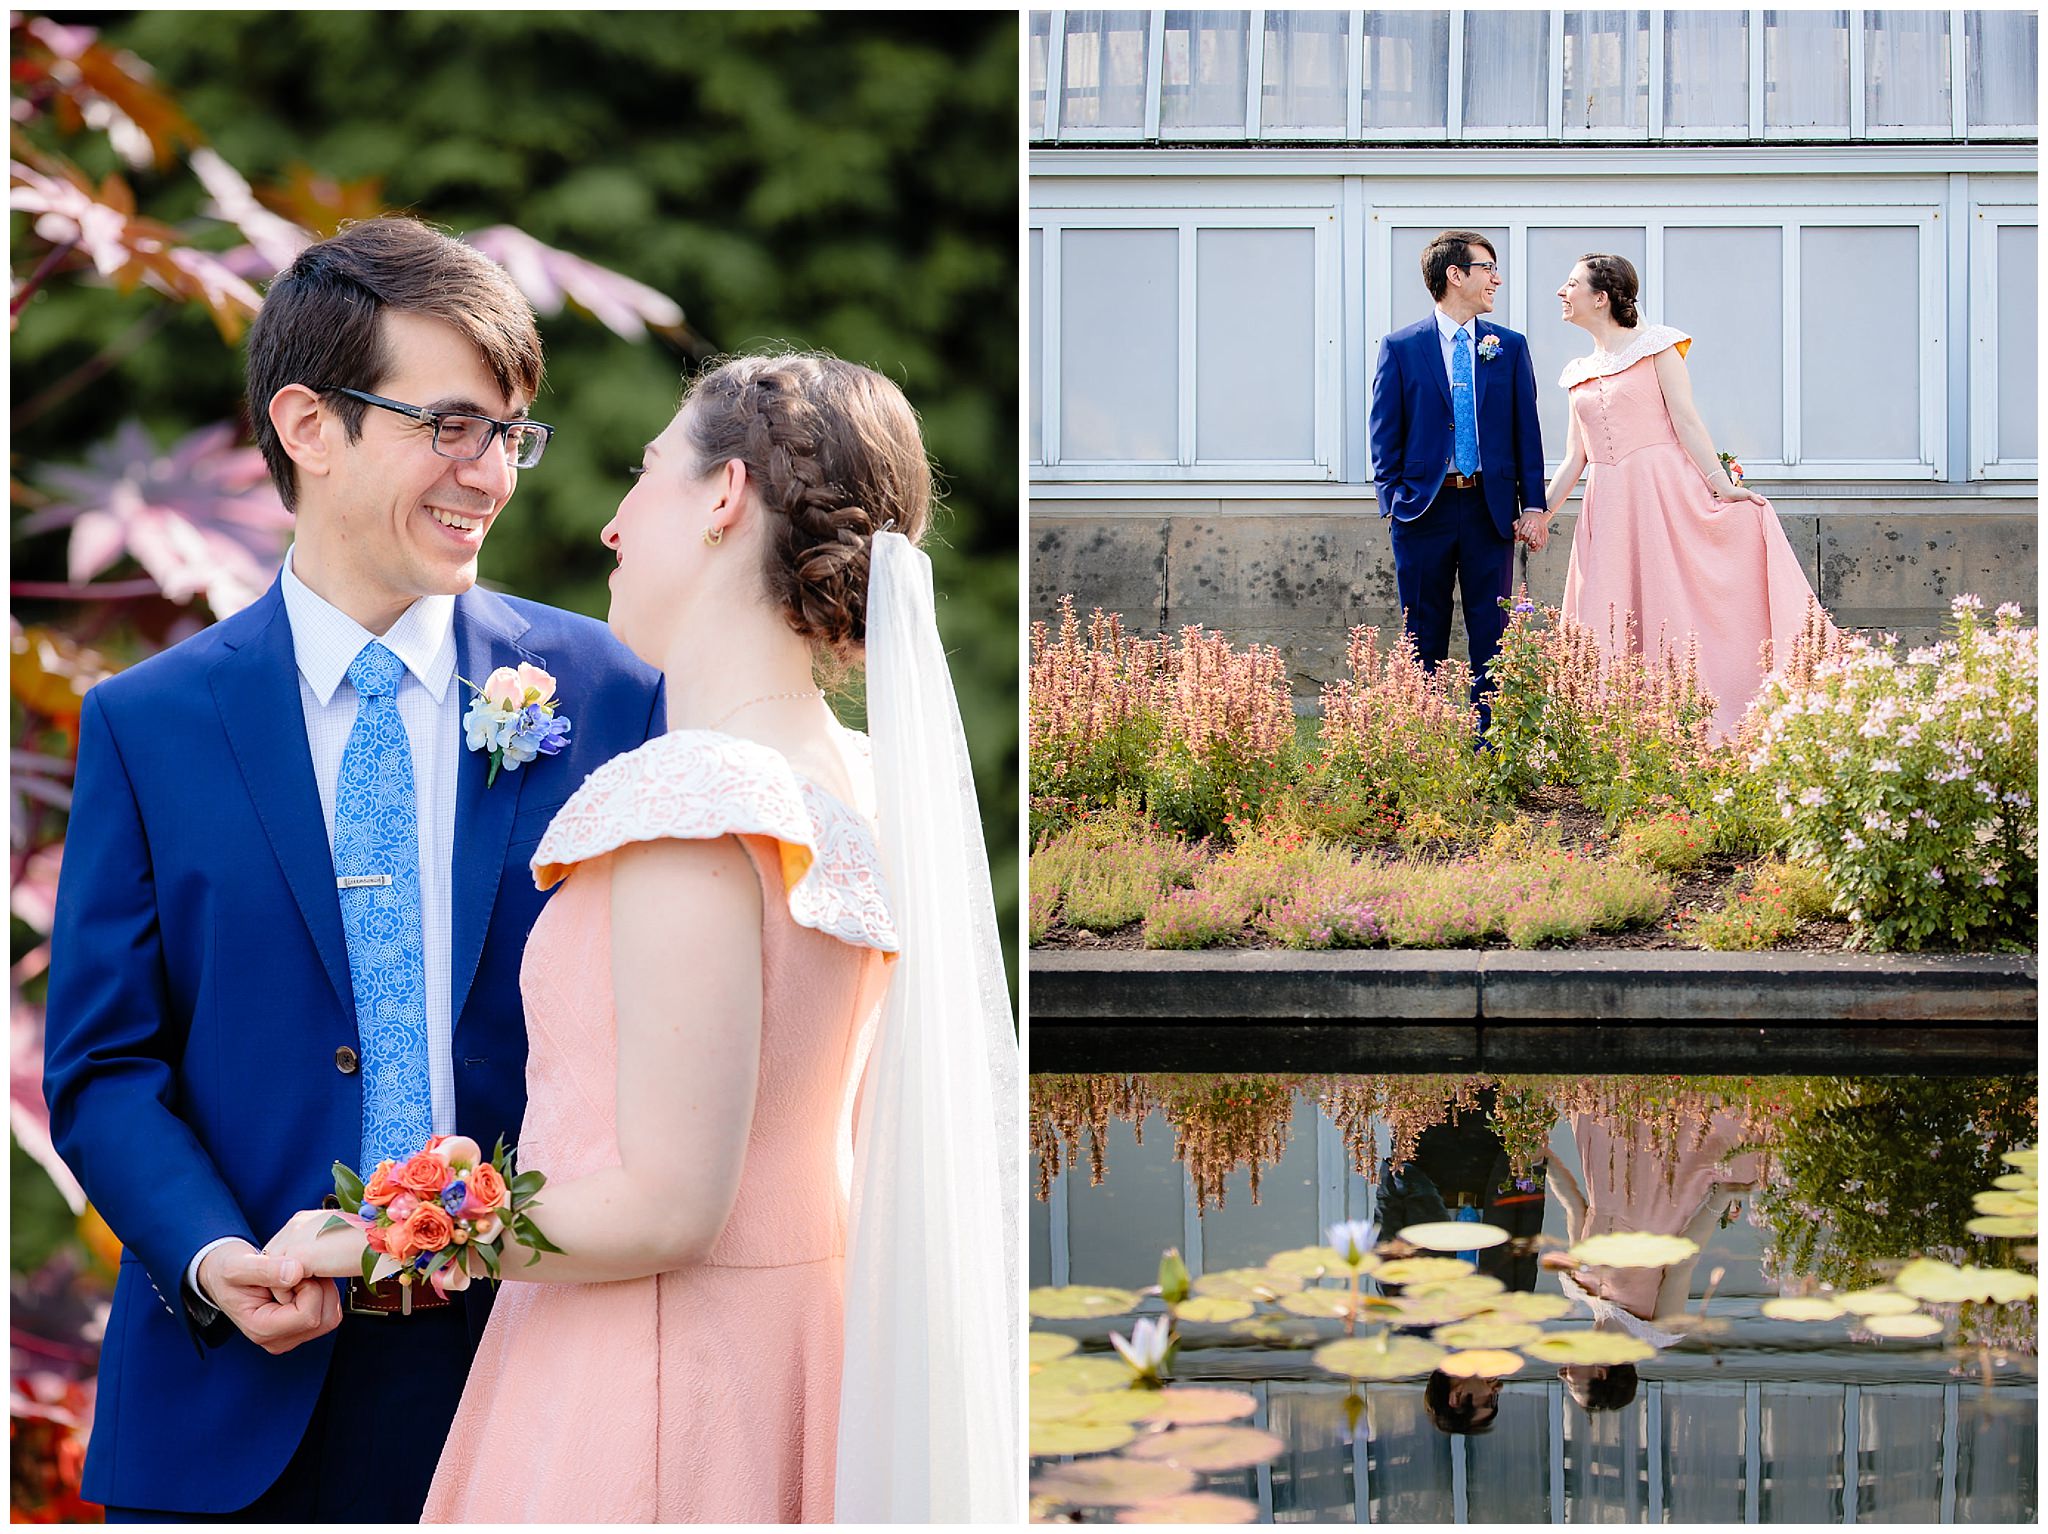 Bride & groom portraits in the flower beds at Phipps Conservatory